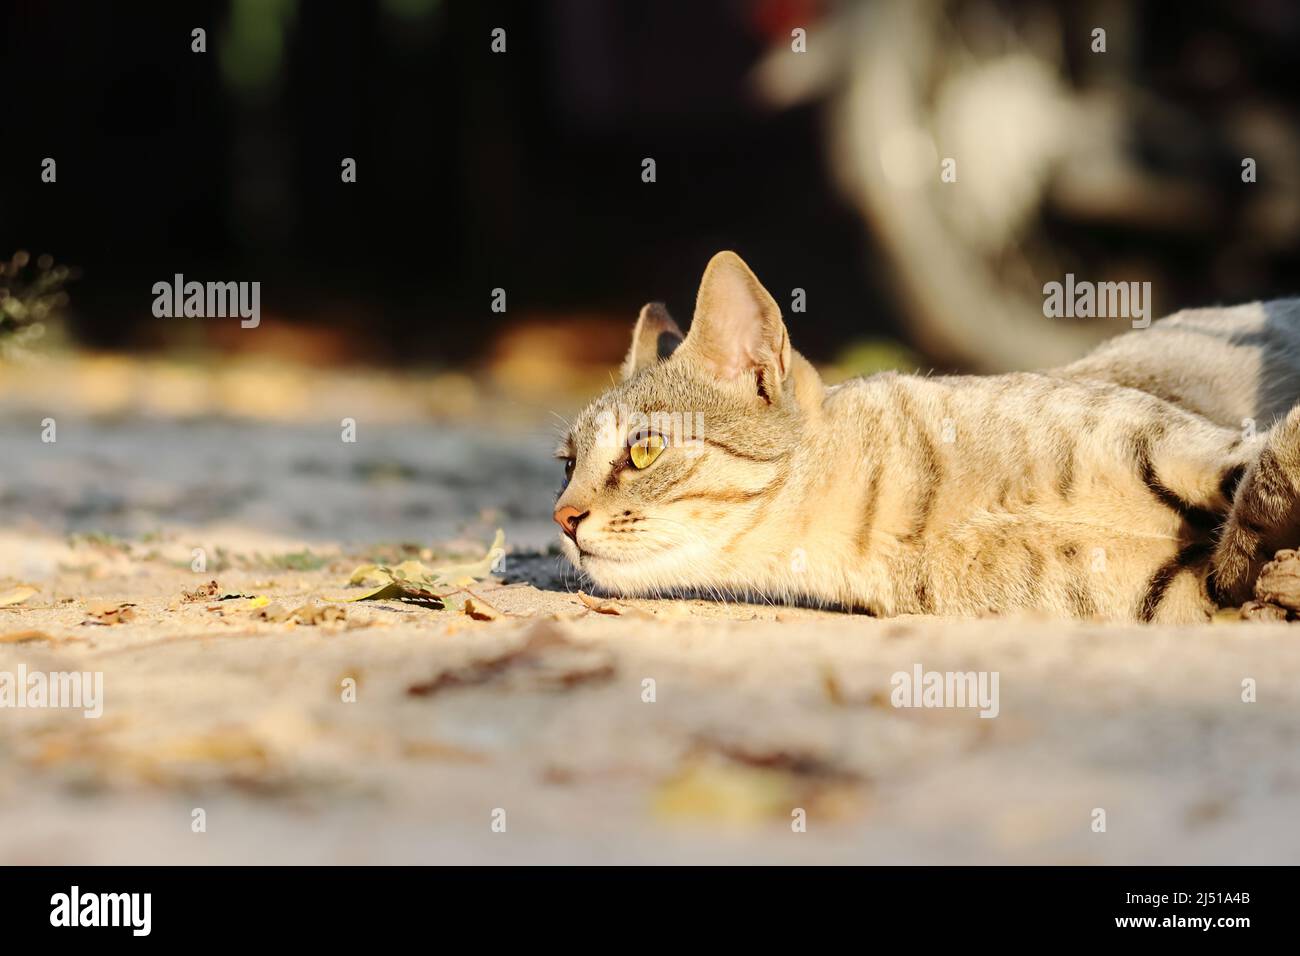 Close-up photo of a tabby cat lying face down on the ground with natural sunlight, India Stock Photo